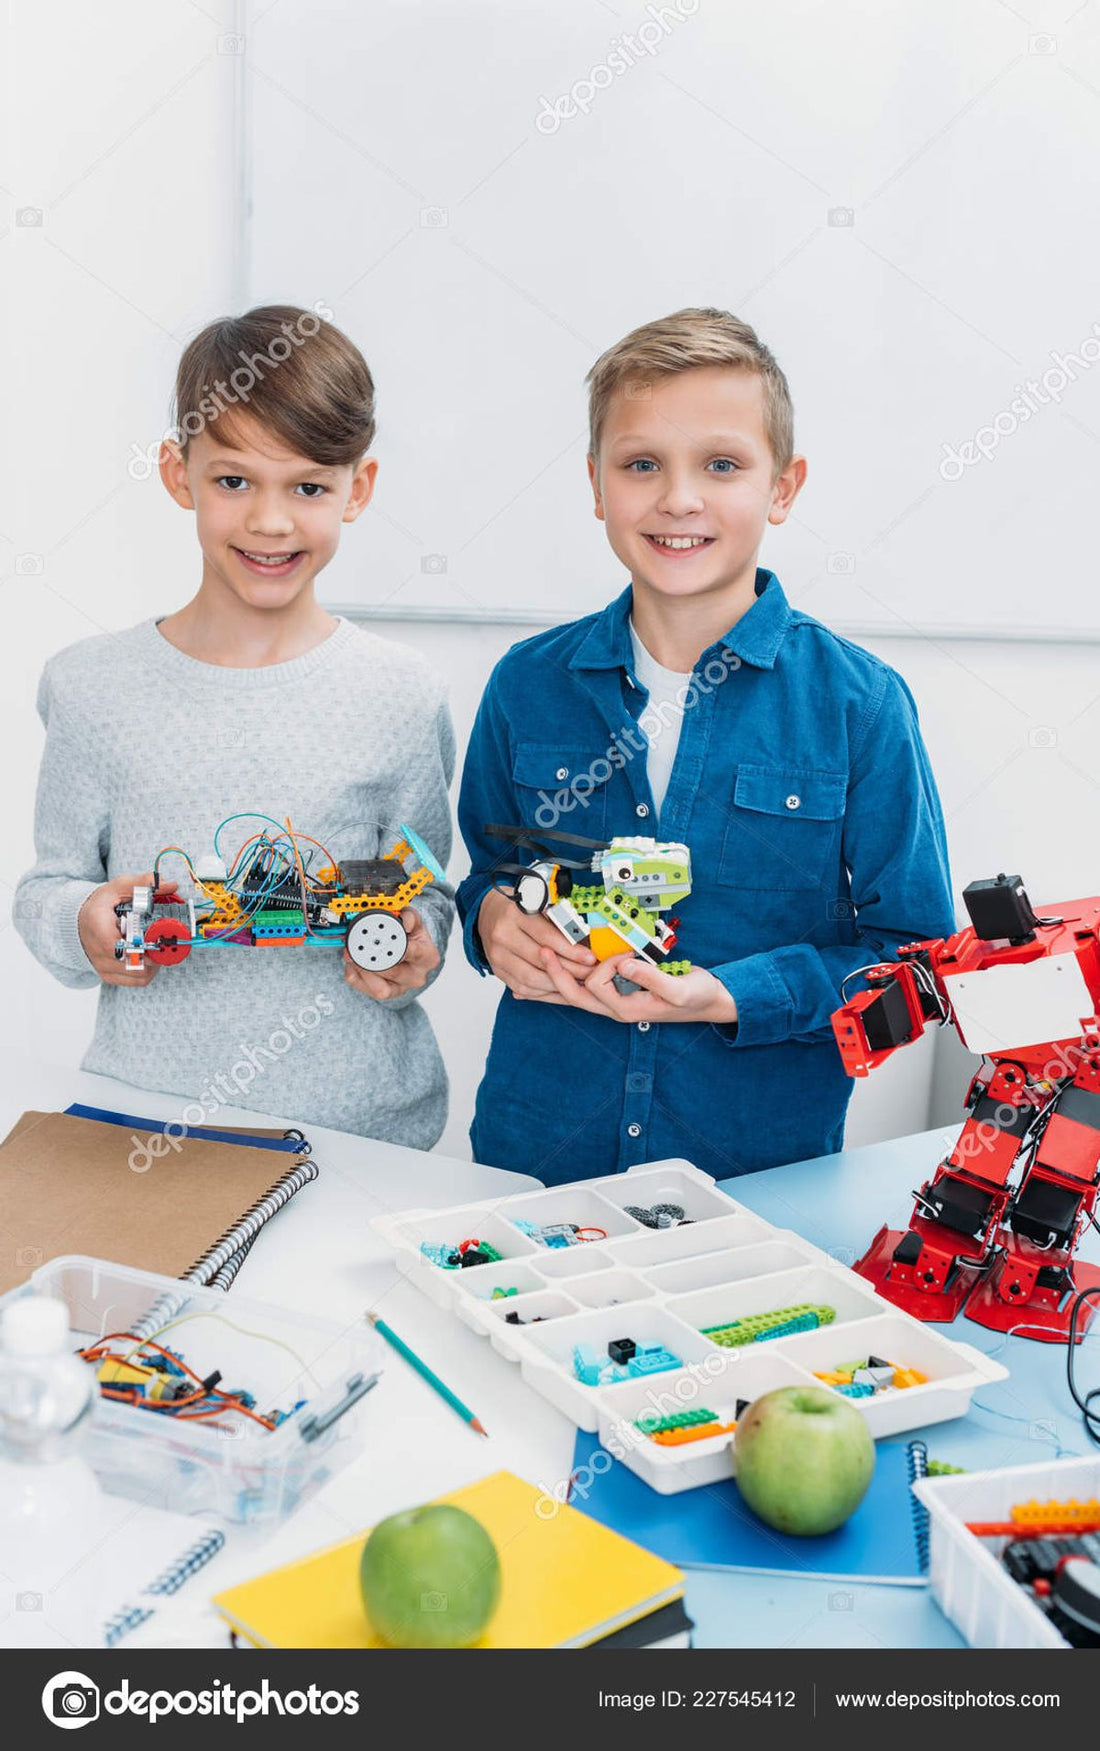 The Importance of Hands-On Learning: How STEM Toys Enhance Education